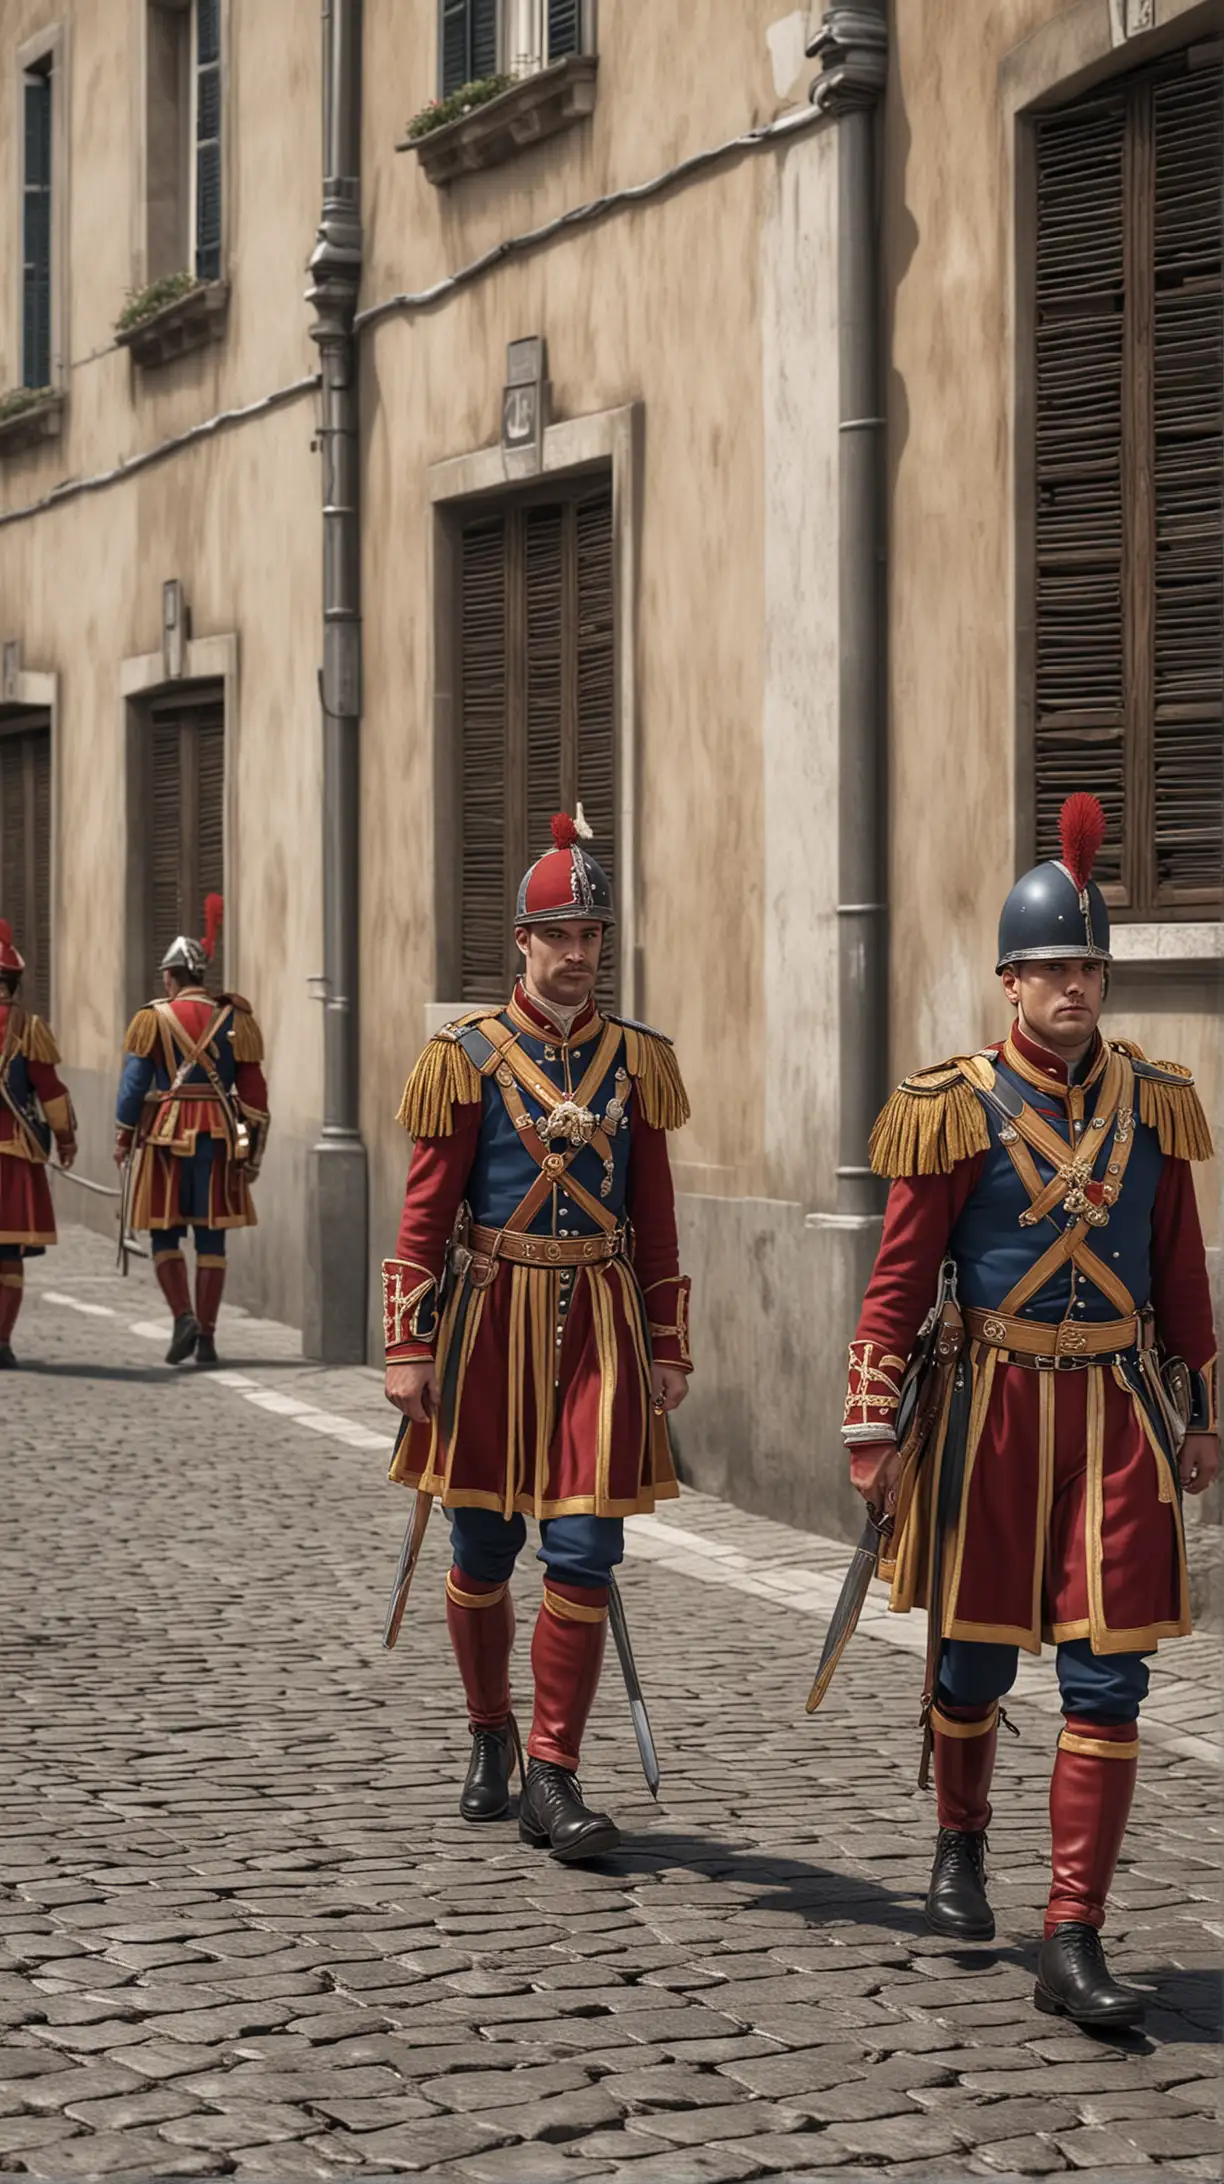 Swiss guards in traditional uniform. Hyper realistic